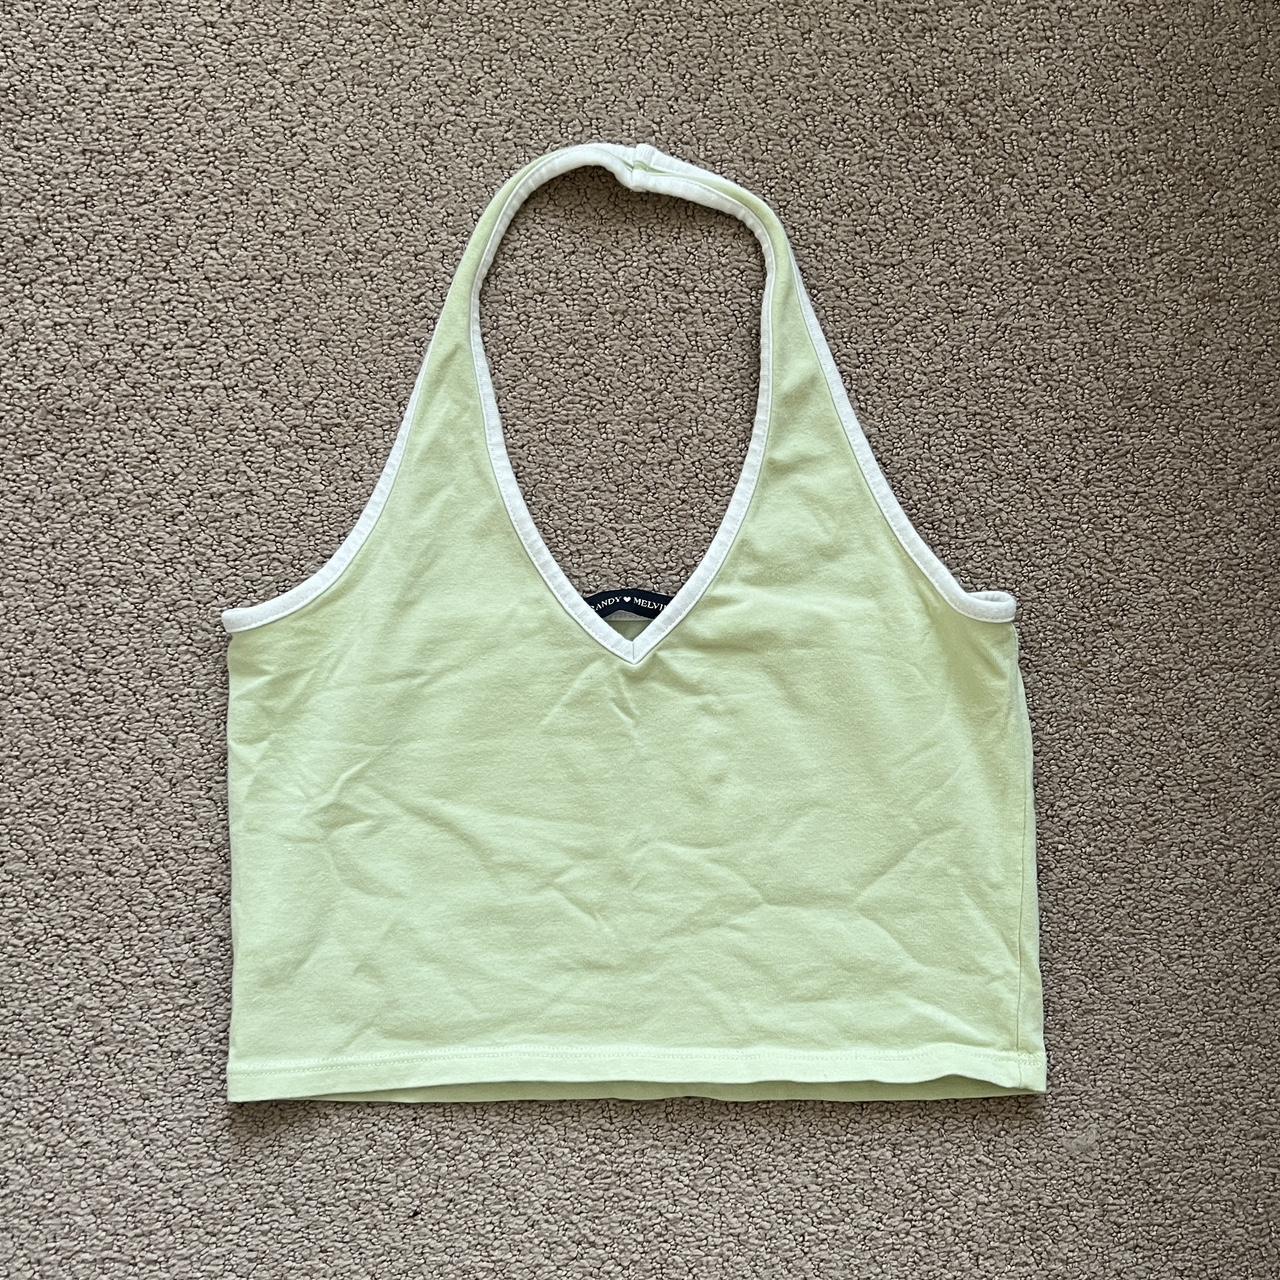 Brandy Melville green and white halter top, Not sold